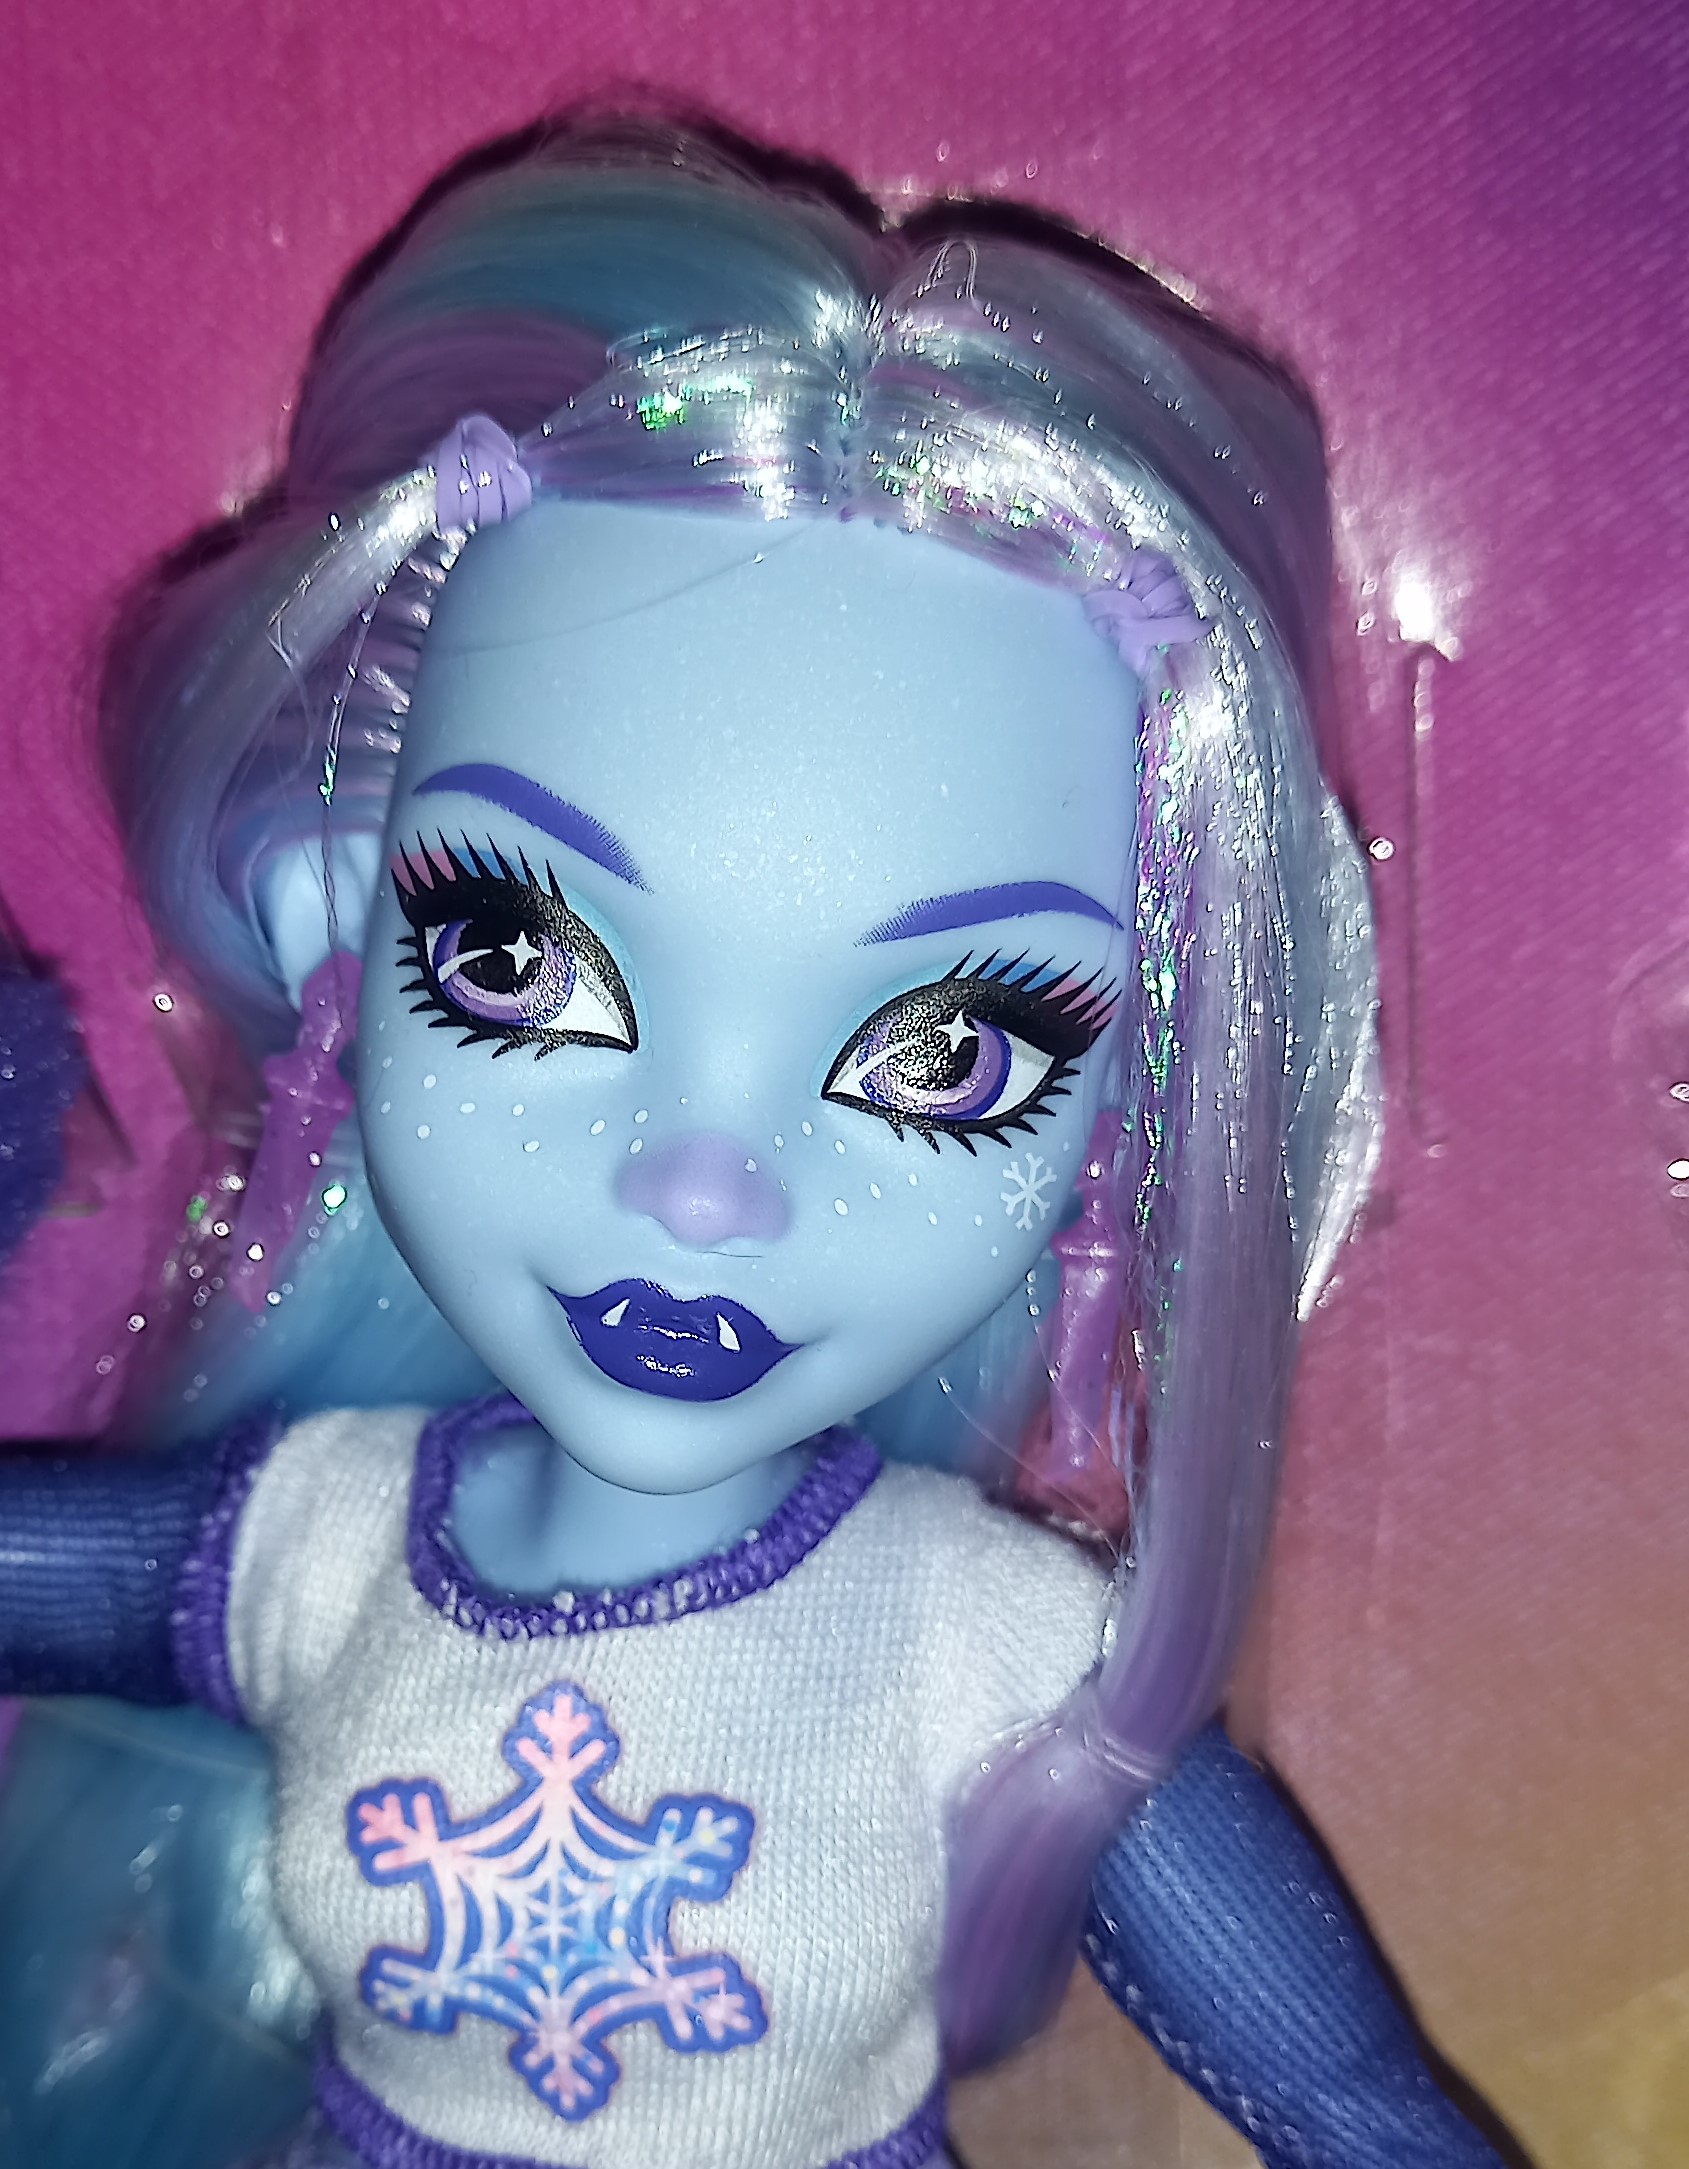 Monkfish's dolly ramble: Monster High g3 Abbey Bominable